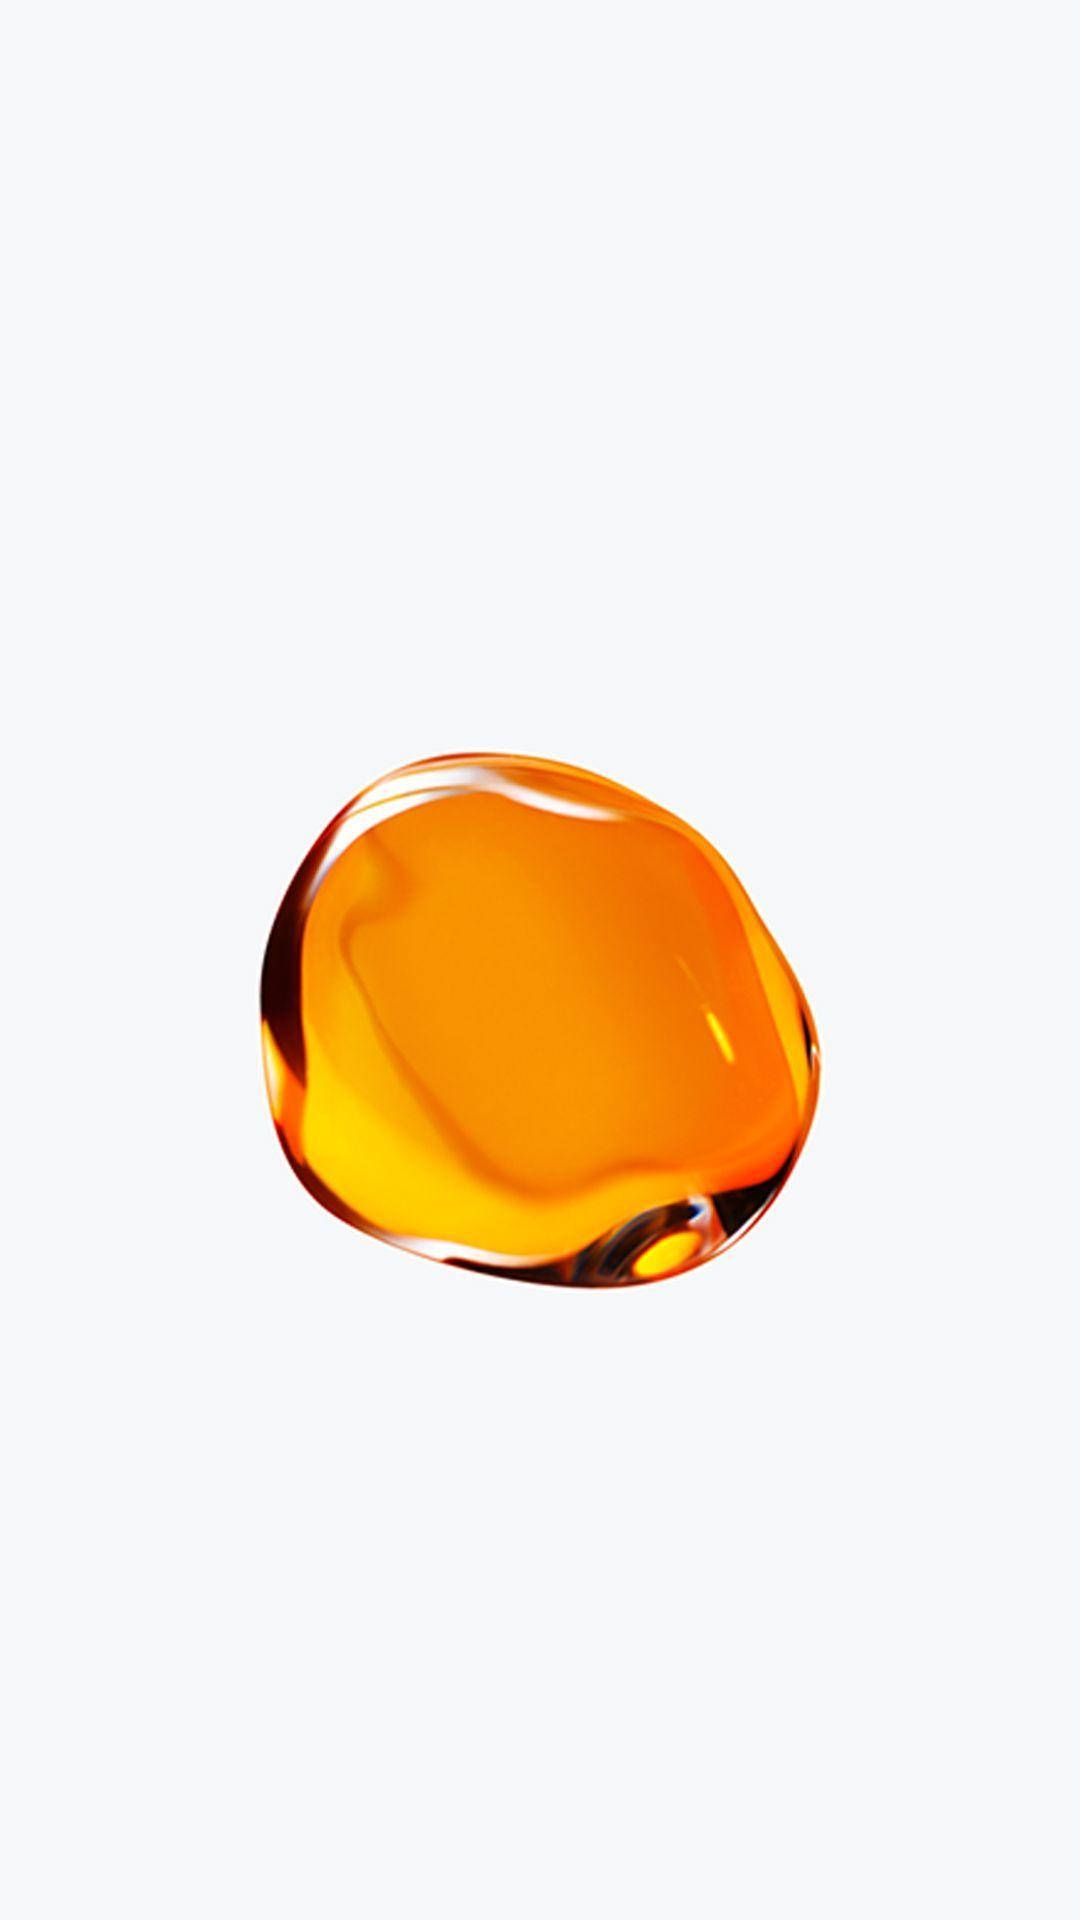 Amber Sap Iphone 8 Live Background